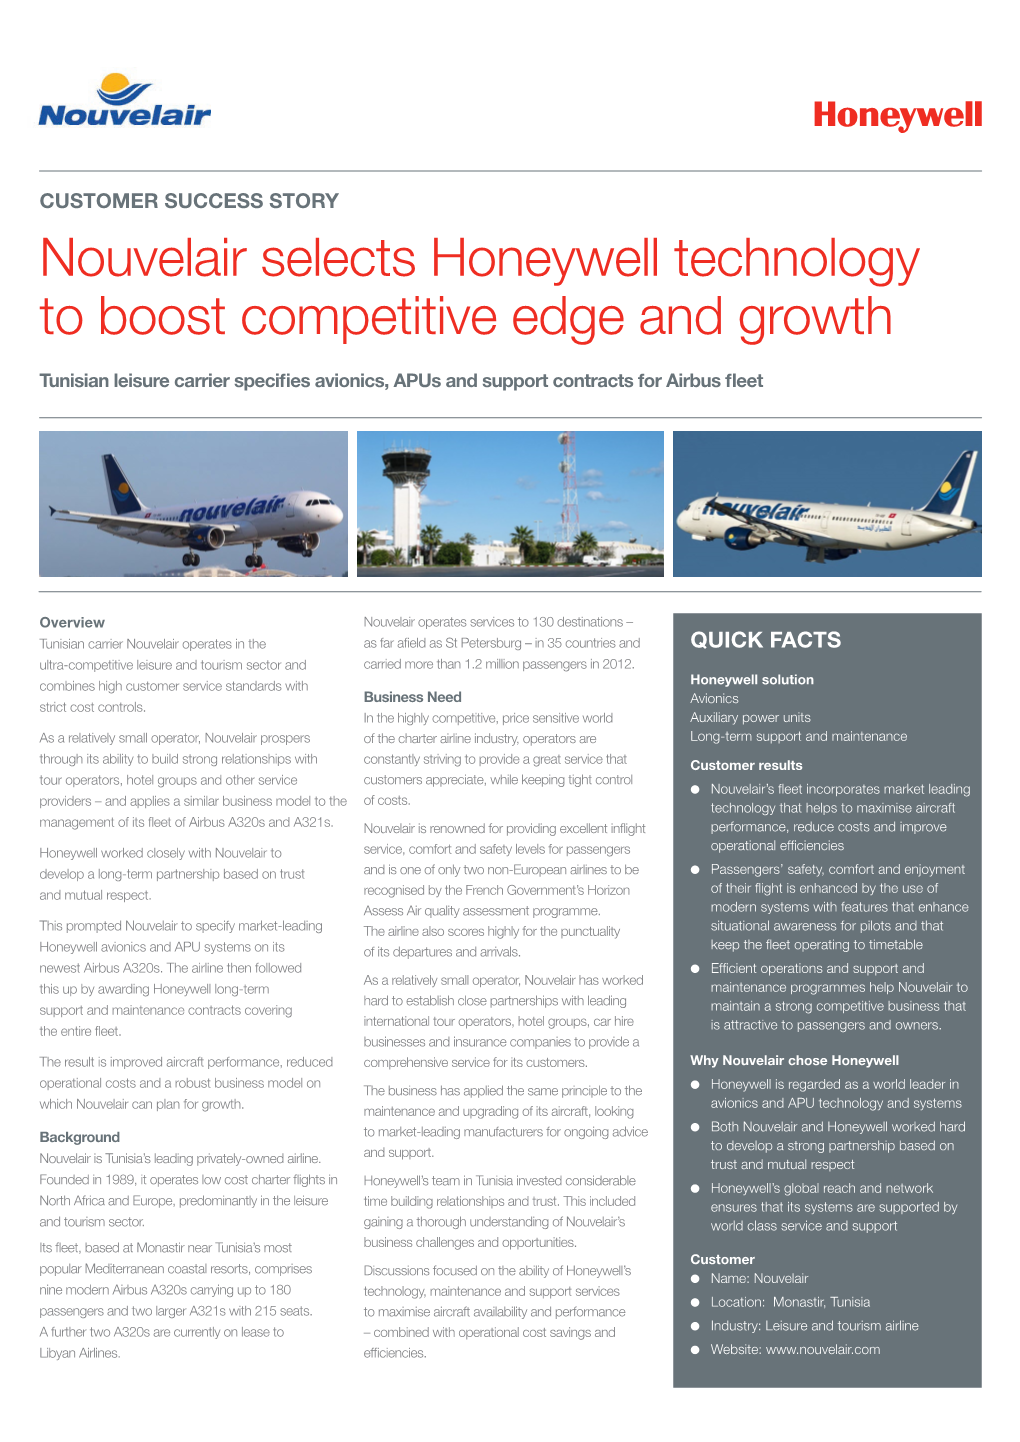 Nouvelair Selects Honeywell Technology to Boost Competitive Edge and Growth